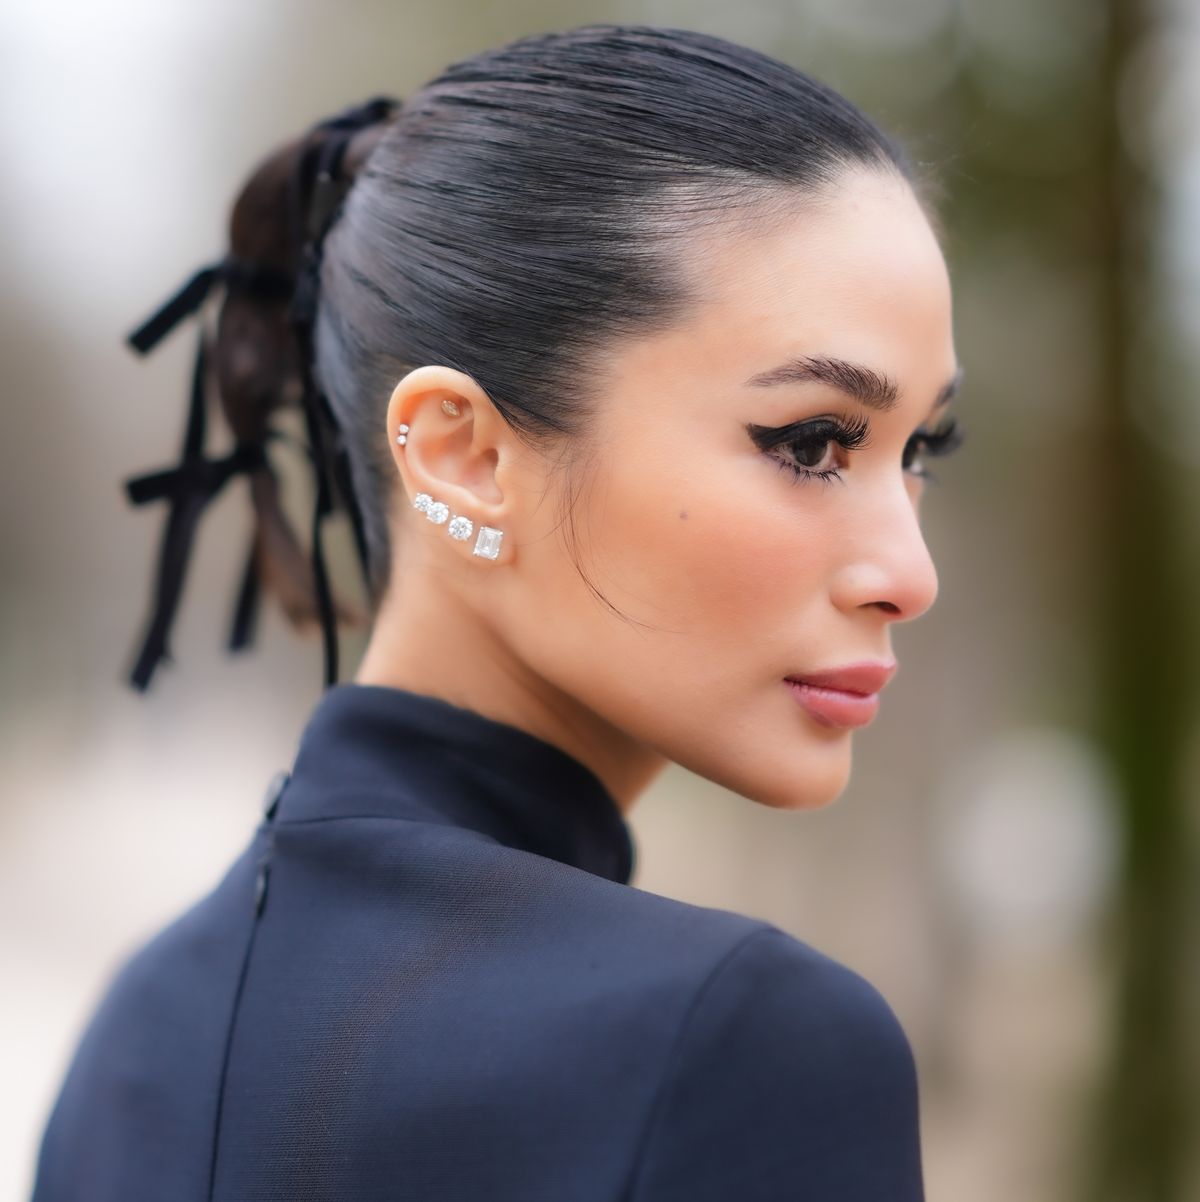 paris, france february 27 heart evangelista wears bejeweled diamond earrings, lipstick, make up , a ponytail, a turtleneck collar navy blue dress, outside dior, during the womenswear fallwinter 20242025 as part of paris fashion week on february 27, 2024 in paris, france photo by edward berthelotgetty images